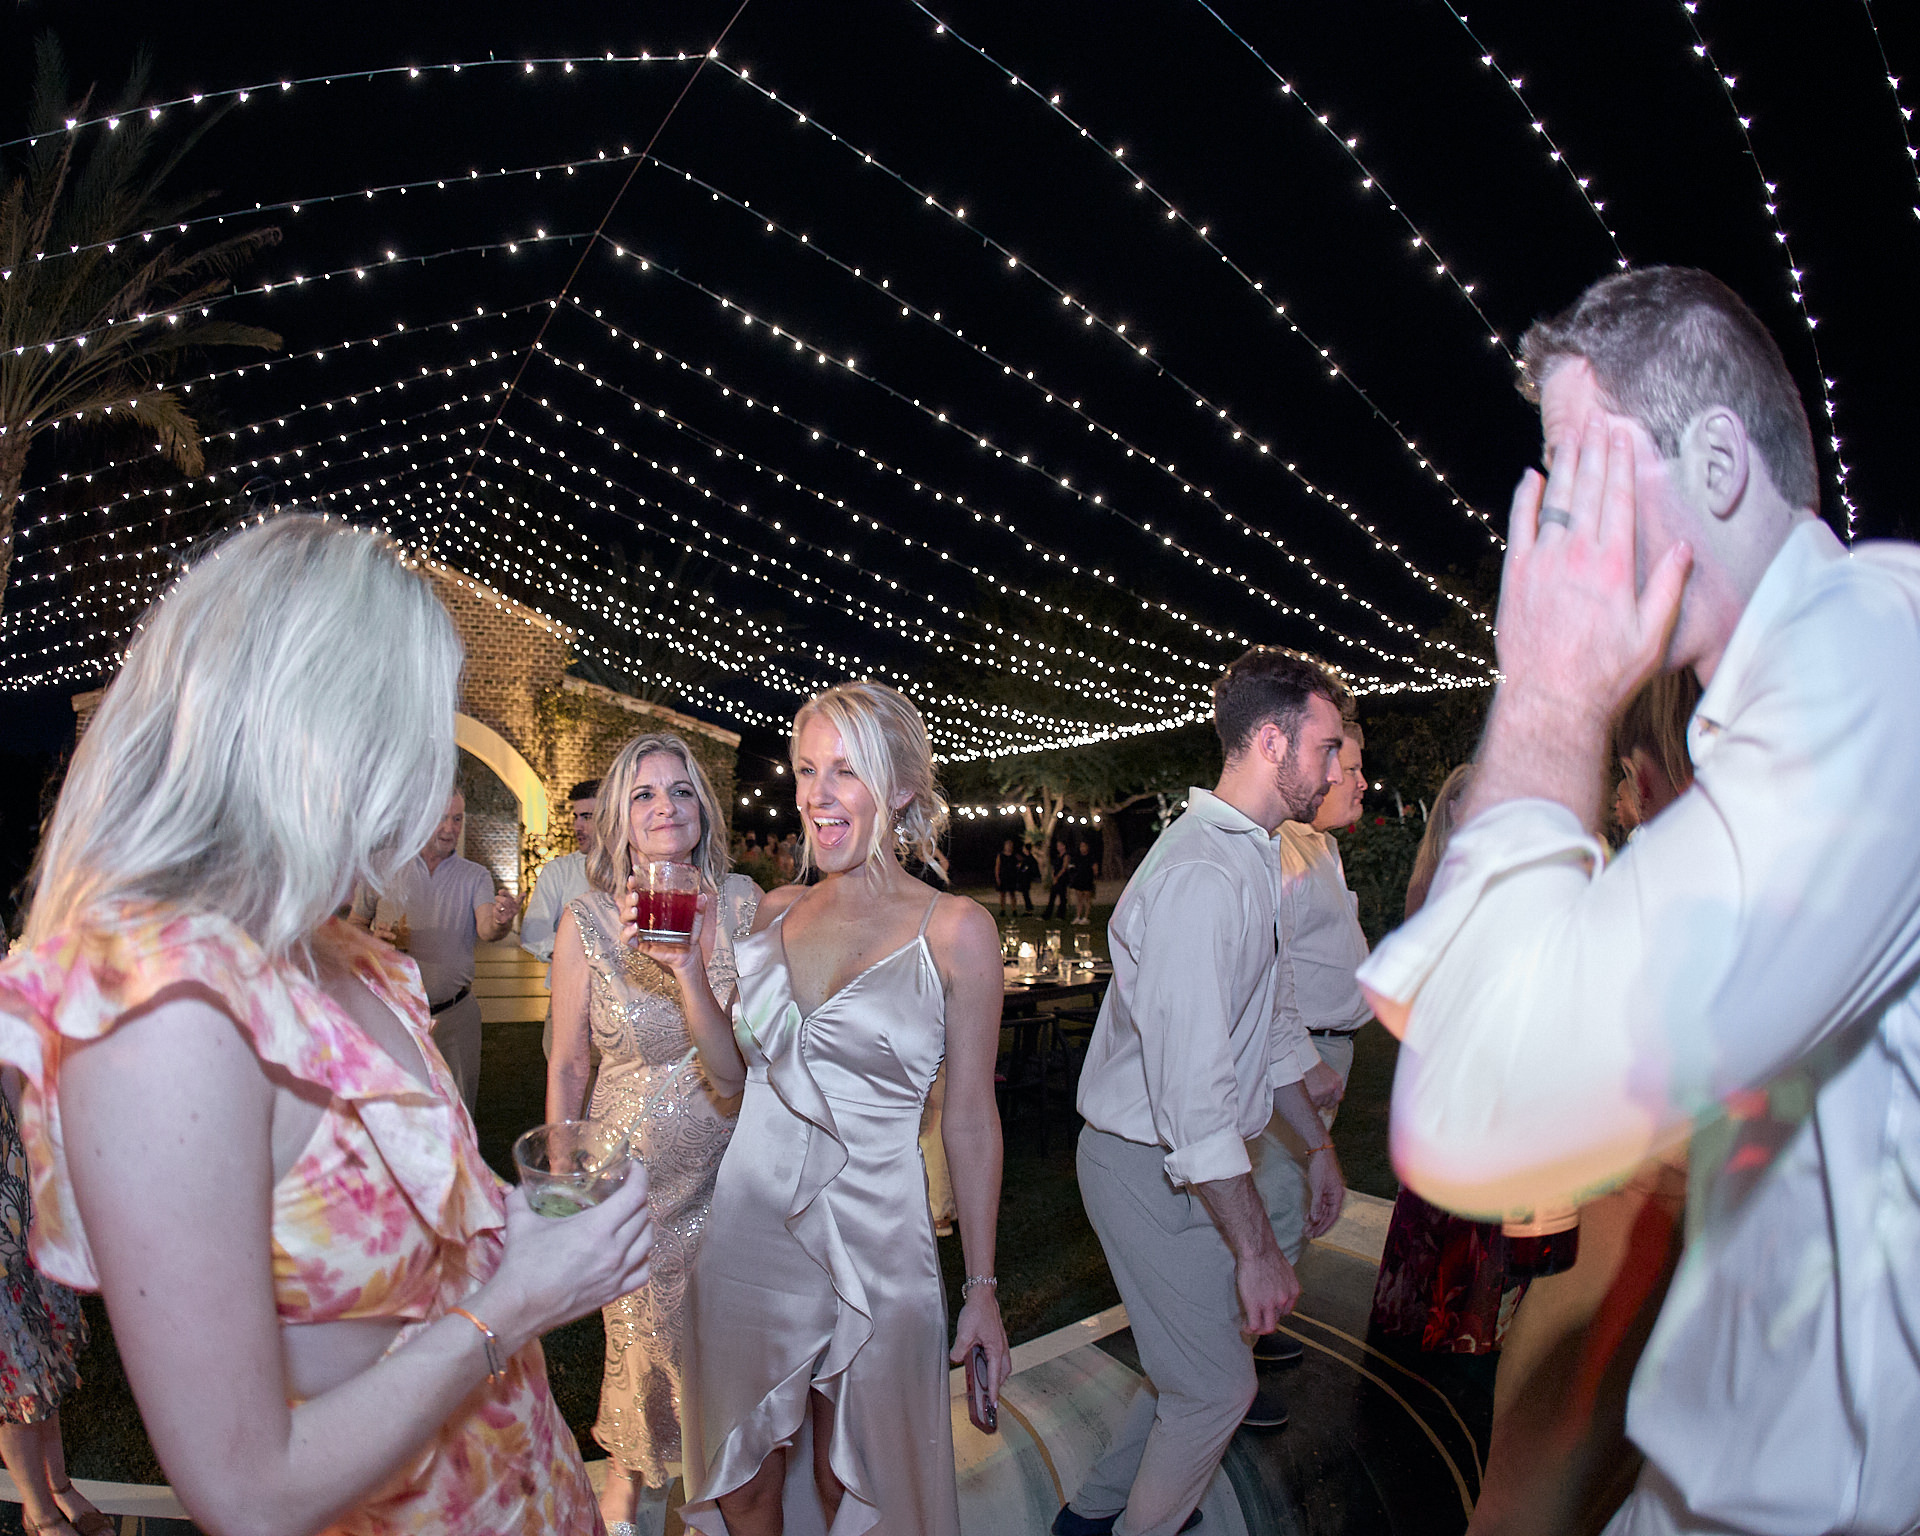 A group of people dancing under string lights at a wedding.